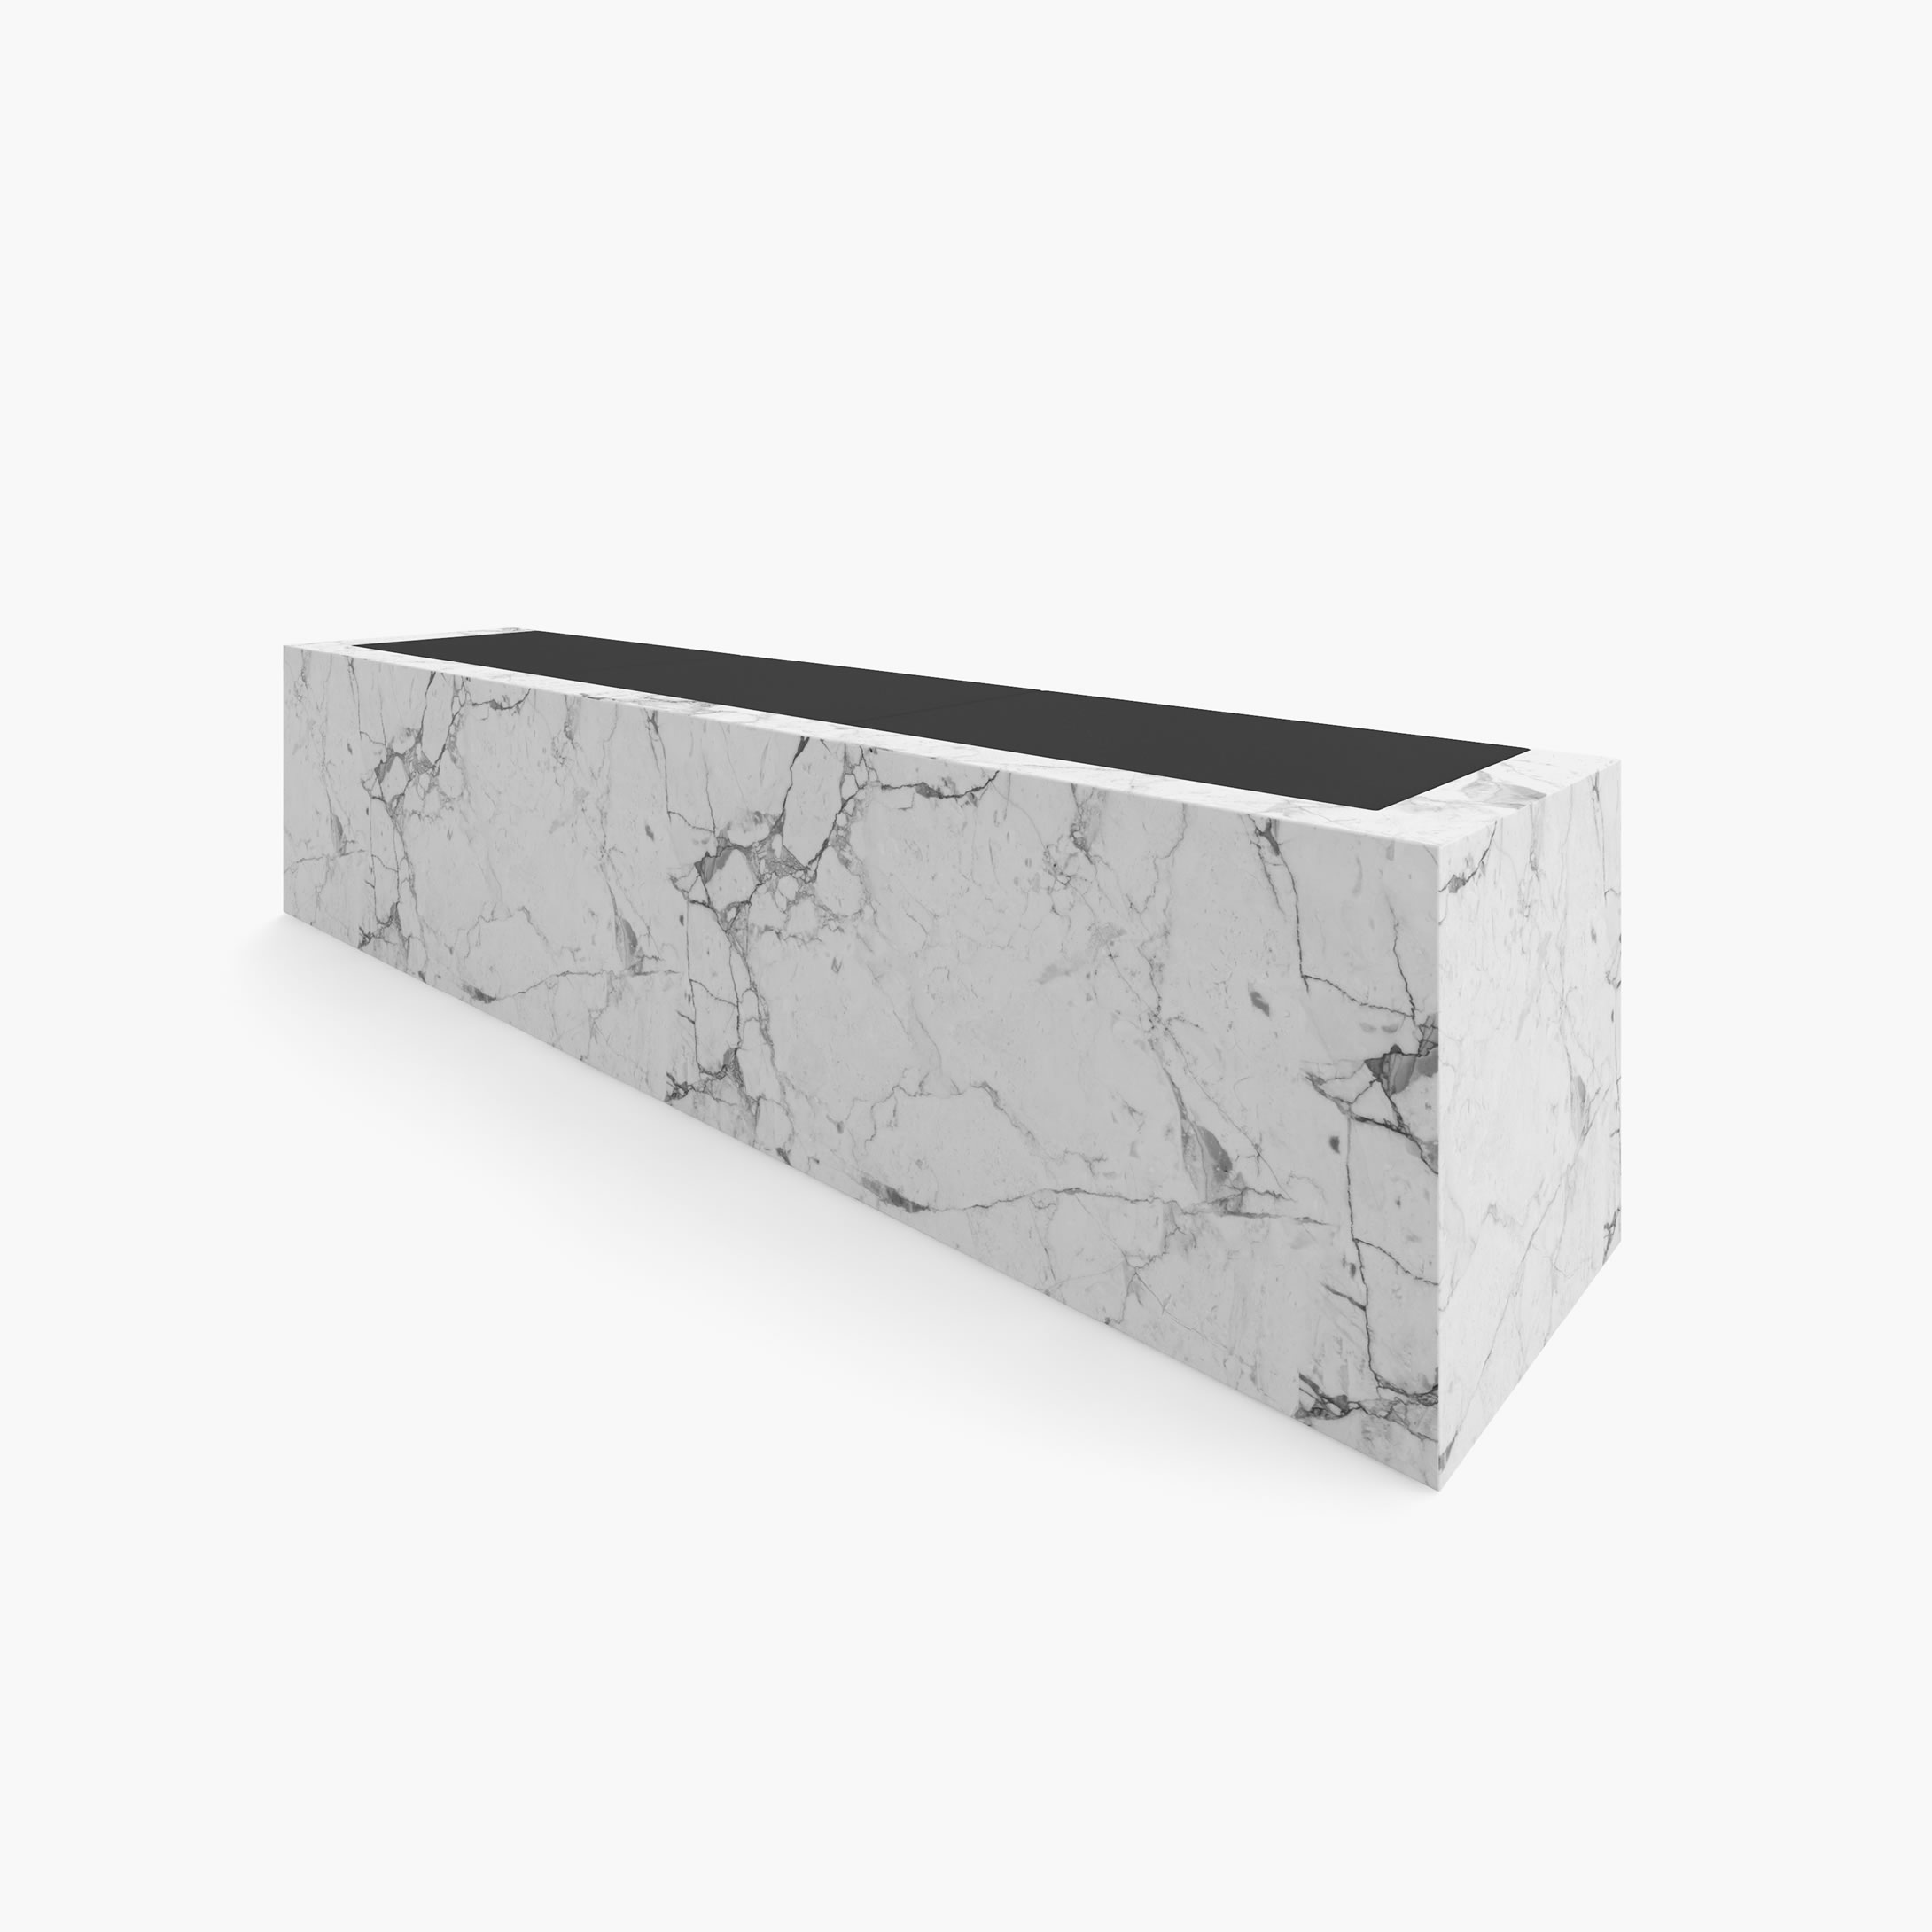 Sideboard with drawers White Arabescato Marble minimalist private workspace Luxury Consoles  Sideboards FS 407 FELIX SCHWAKE